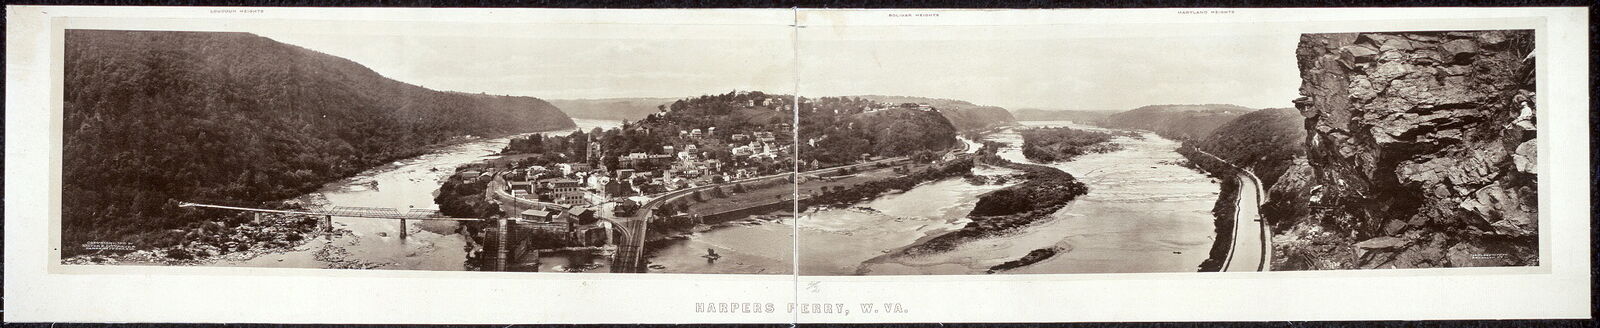 Photo:1912 Panoramic: Harpers Ferry,West Virginia